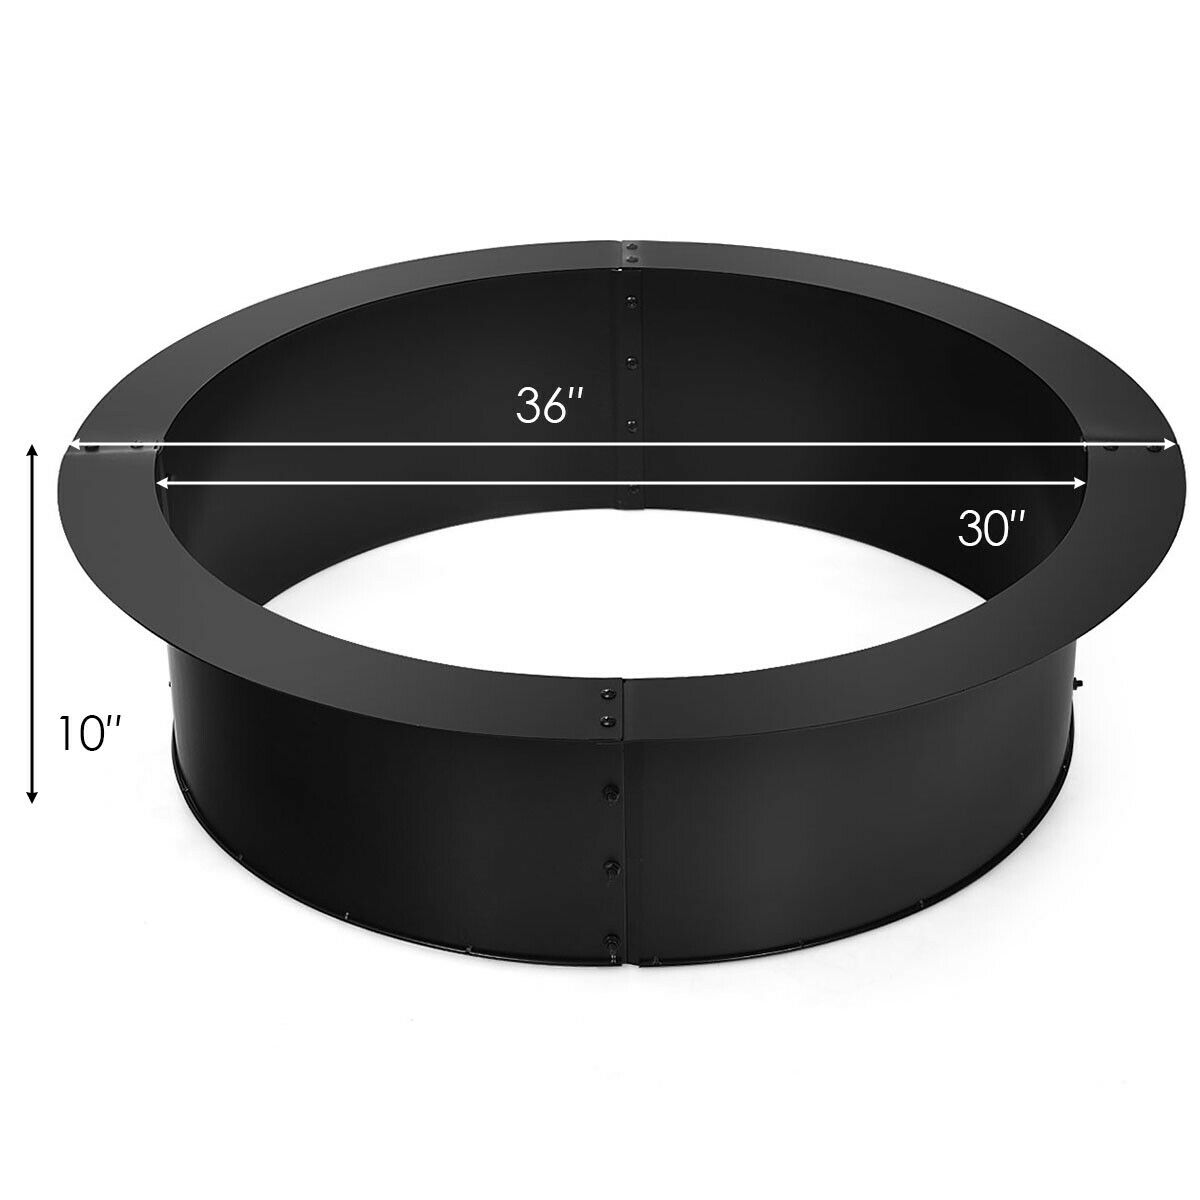 Gymax 36 Inch Round Steel Fire Pit Ring Liner DIY Wood Burning Insert - image 8 of 10